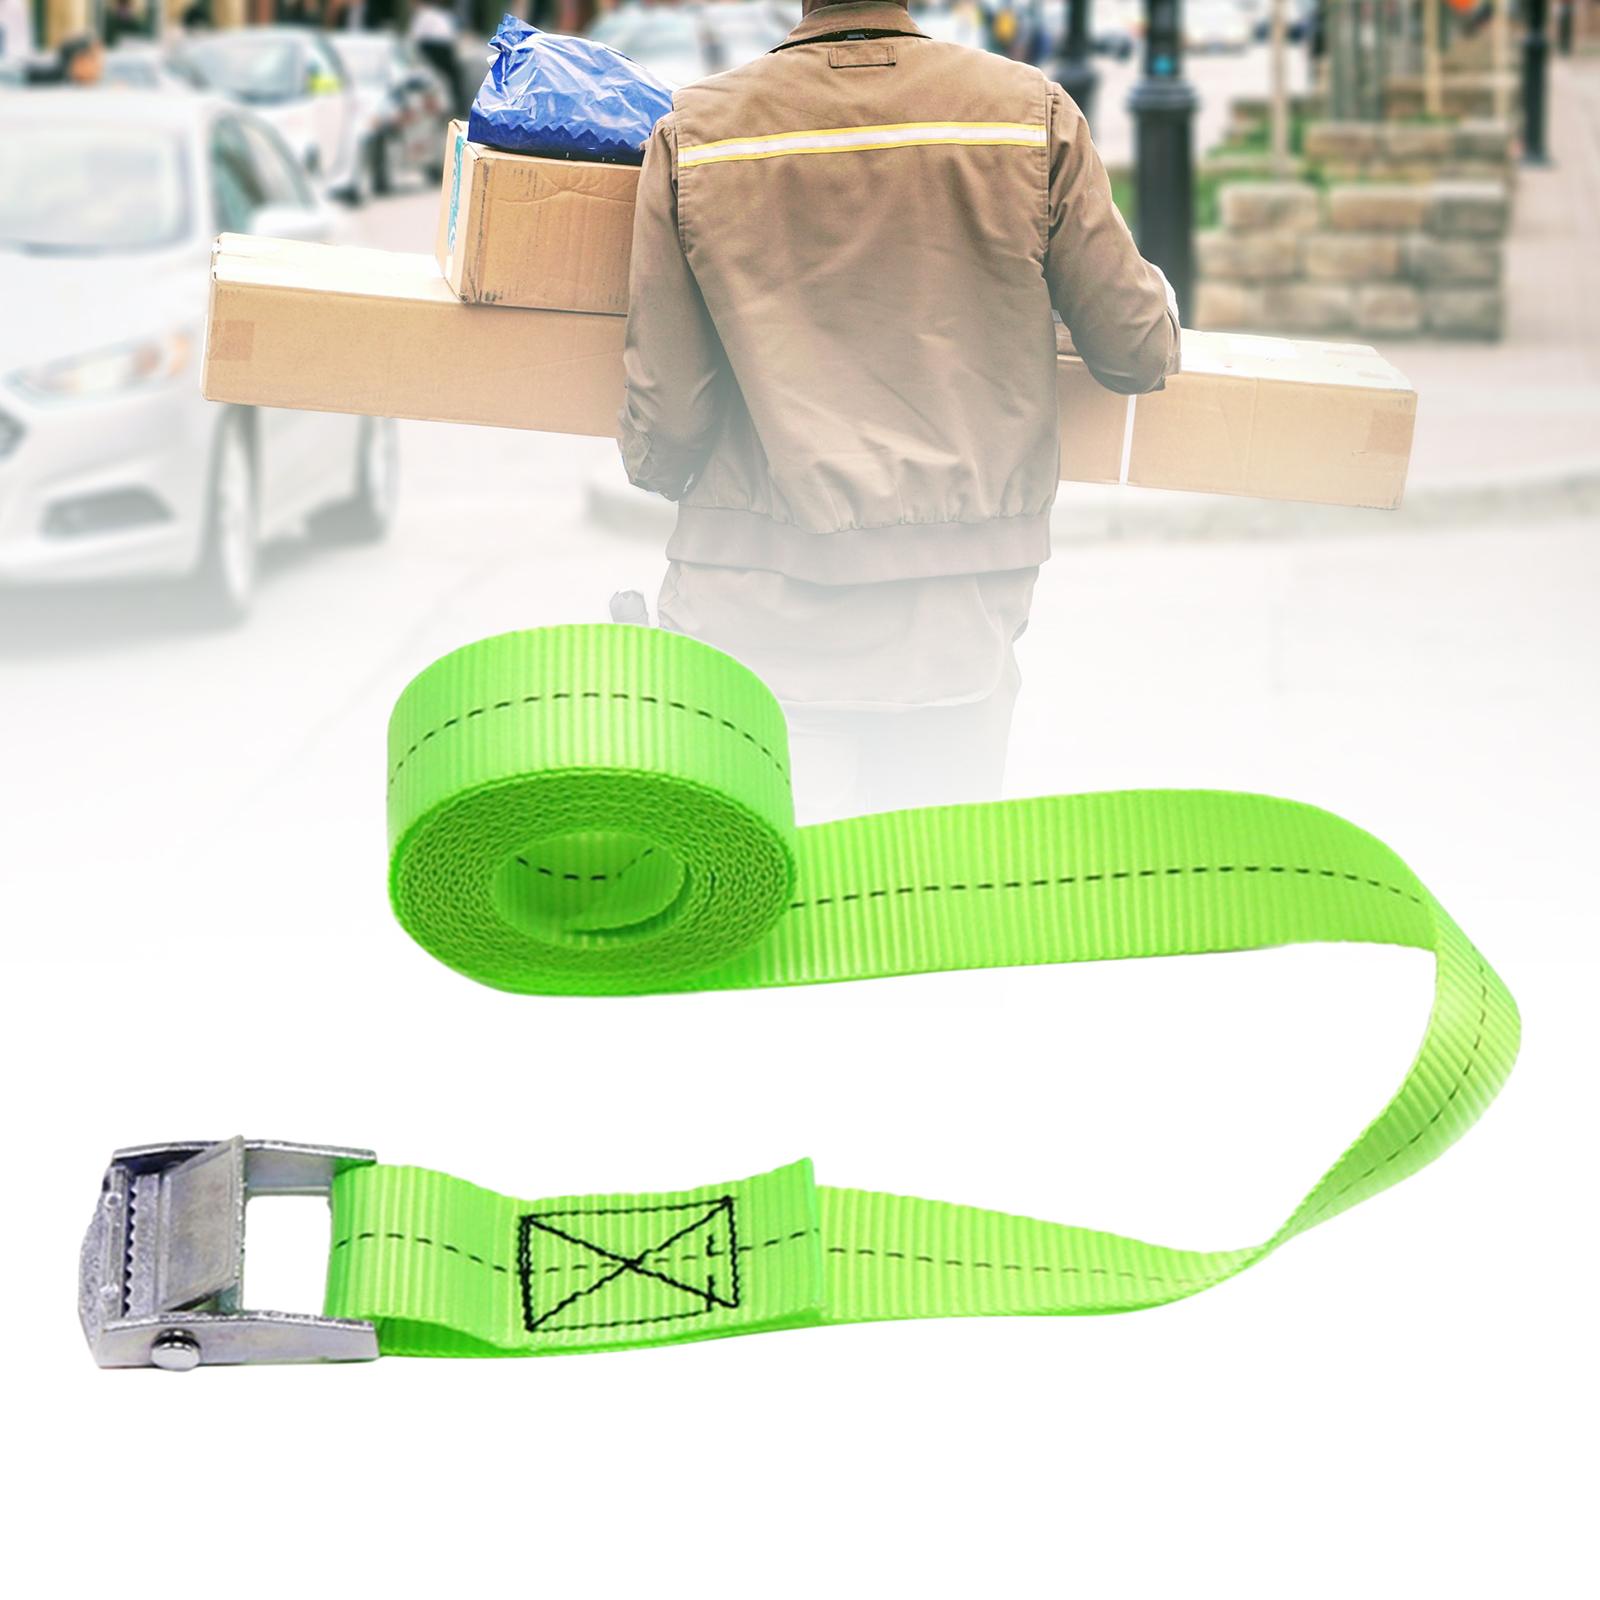 Luggage Strap Travel Luminous Lashing Straps for Traveling Outdoor Trips 118inch